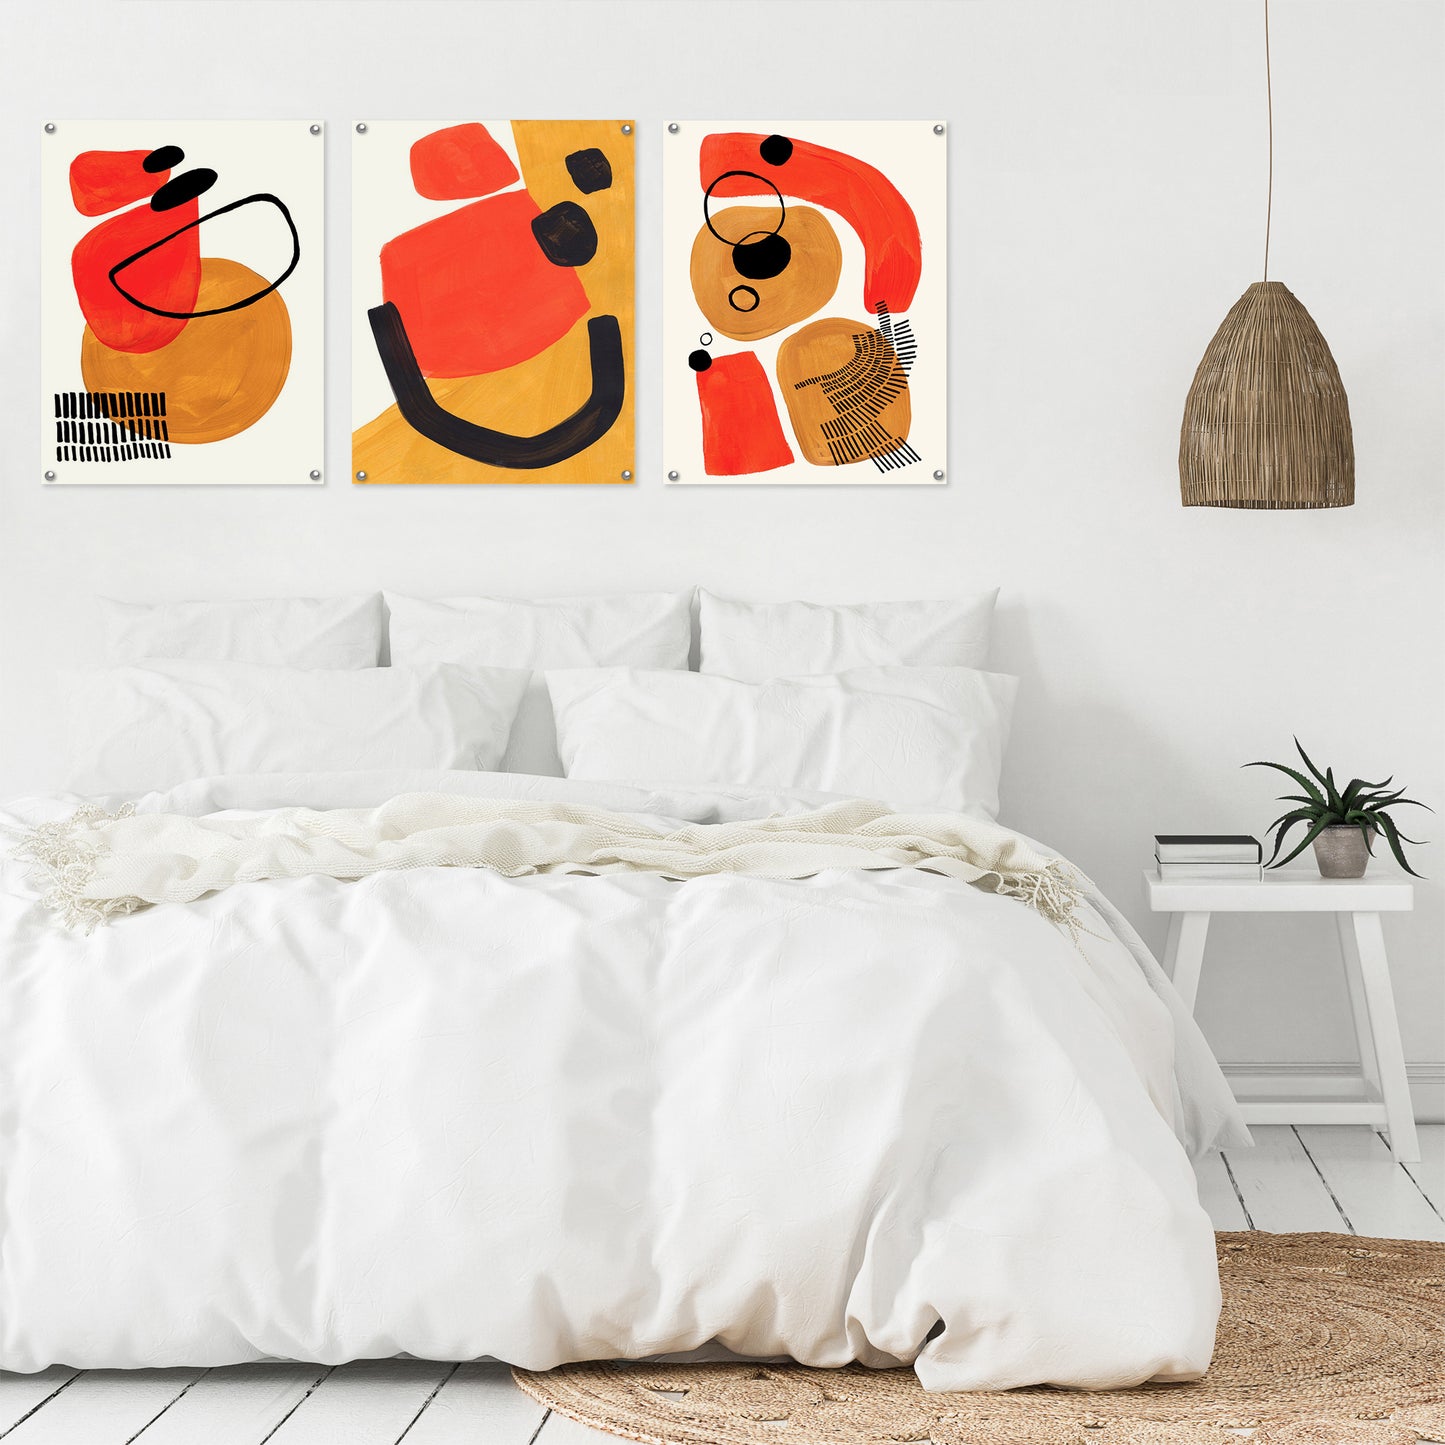 (Set of 3) Triptych Wall Art Mid Century Abstract by Ejaaz Haniff - Poster Print